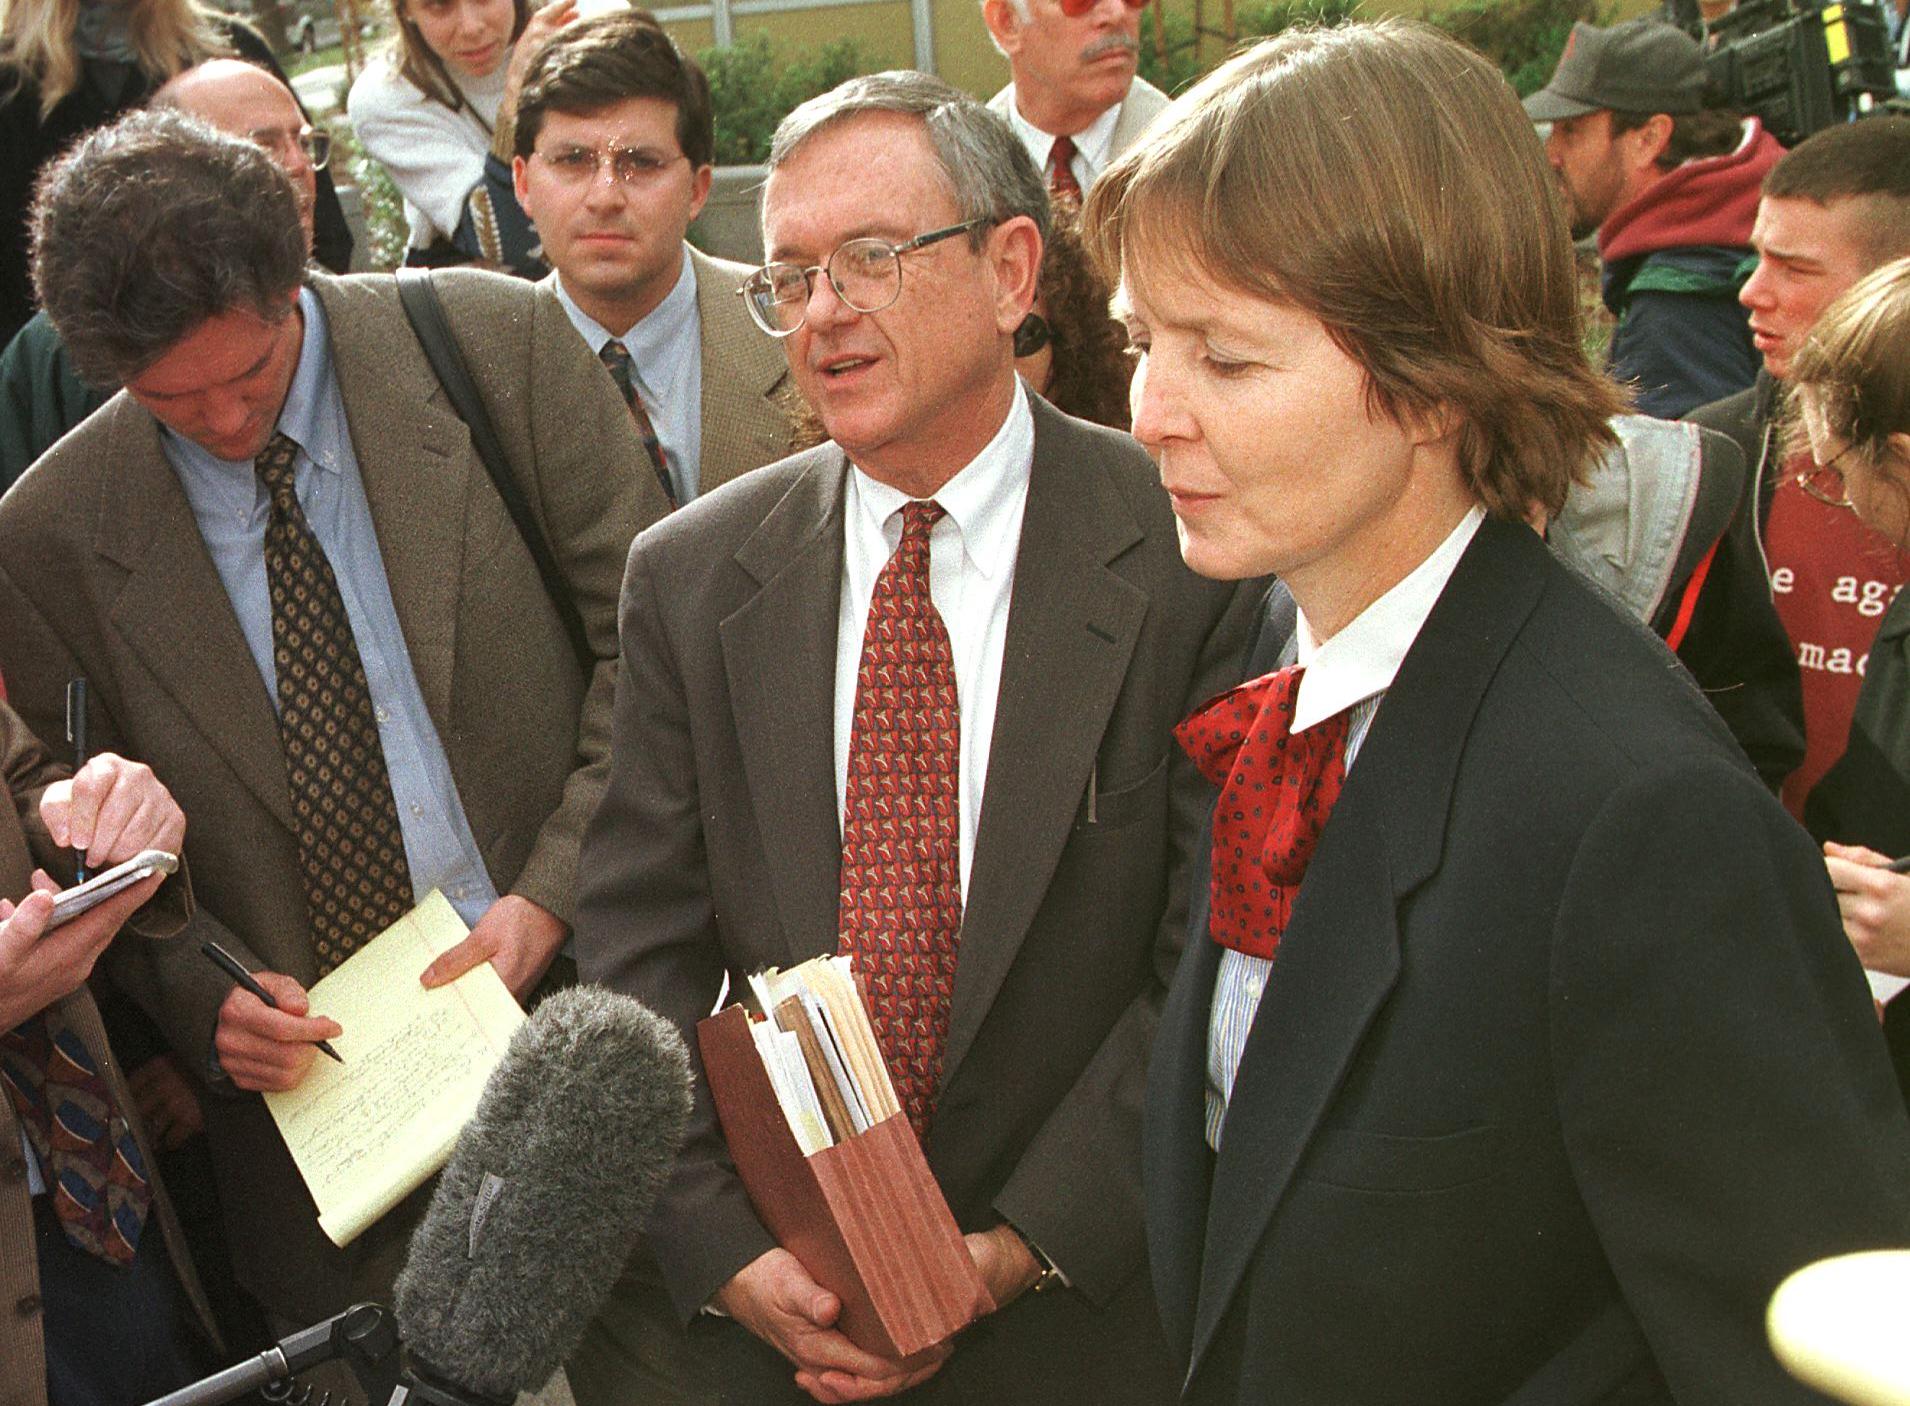 Defense attorney Judy Clarke, at right, responds to questions at a press conference after the trial of Unabomber suspect Theodore Kaczynski was delayed in Sacramento, California, Jan. 8, 1998.(Rich Pedroncelli/AFP via Getty Images)